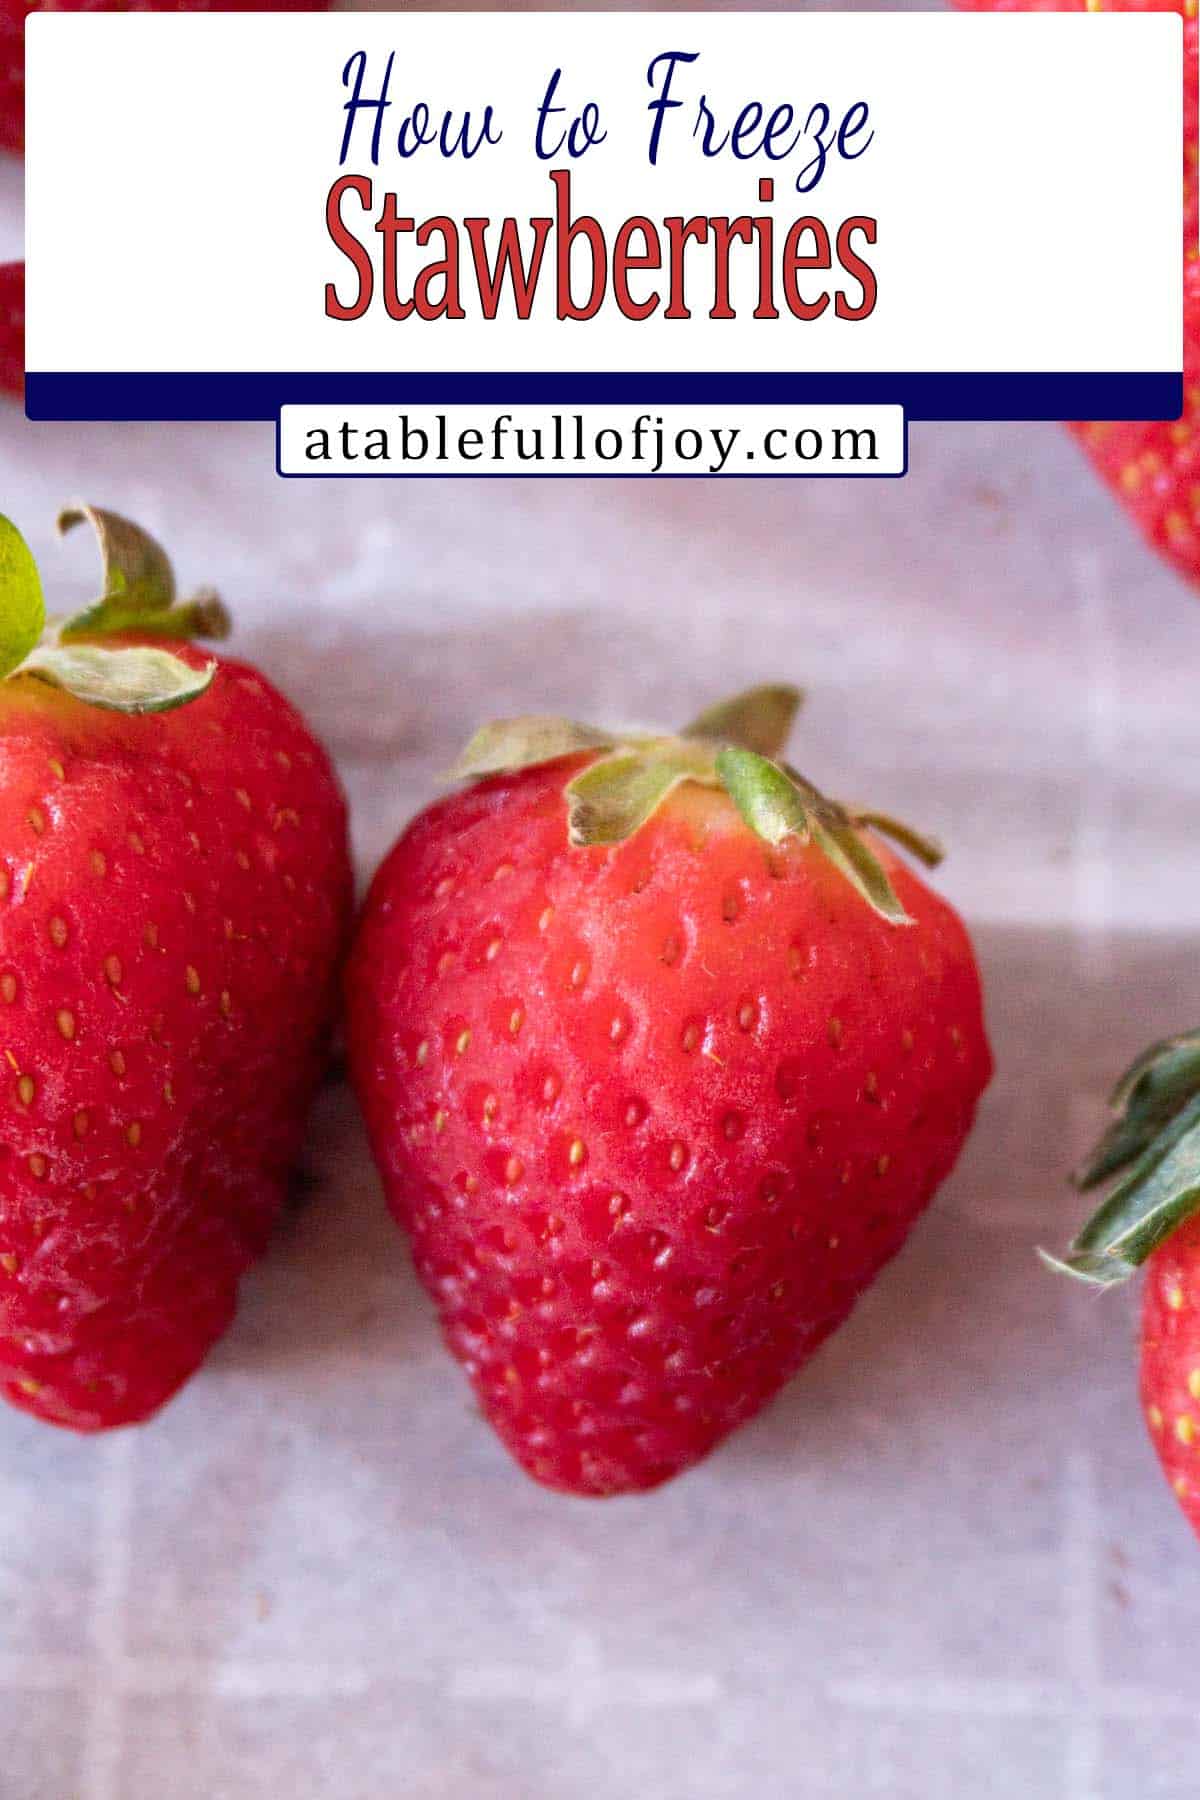 how to freeze strawberries Pinterest pin